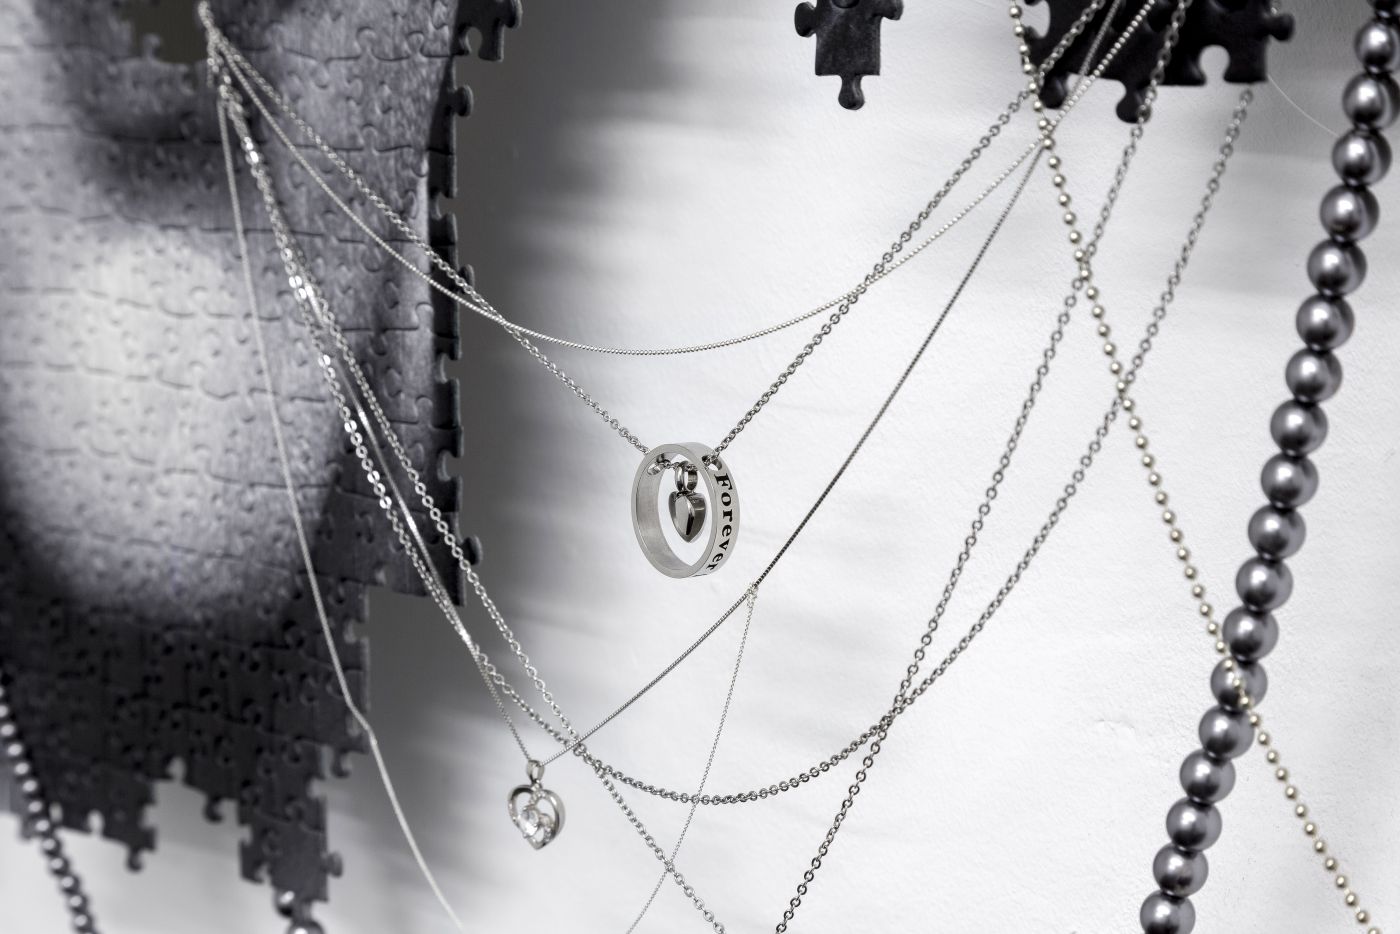 Julian-Jakob Kneer, EROS / THANATOS (YOU DID IT, FOREVER YOUNG), 2021, Digital print on puzzle, silver and steel chains, engraved silver and steel lockets, plastic coated jewelry, aluminium construction, 105cm x 90cm x 7cm, (detail)